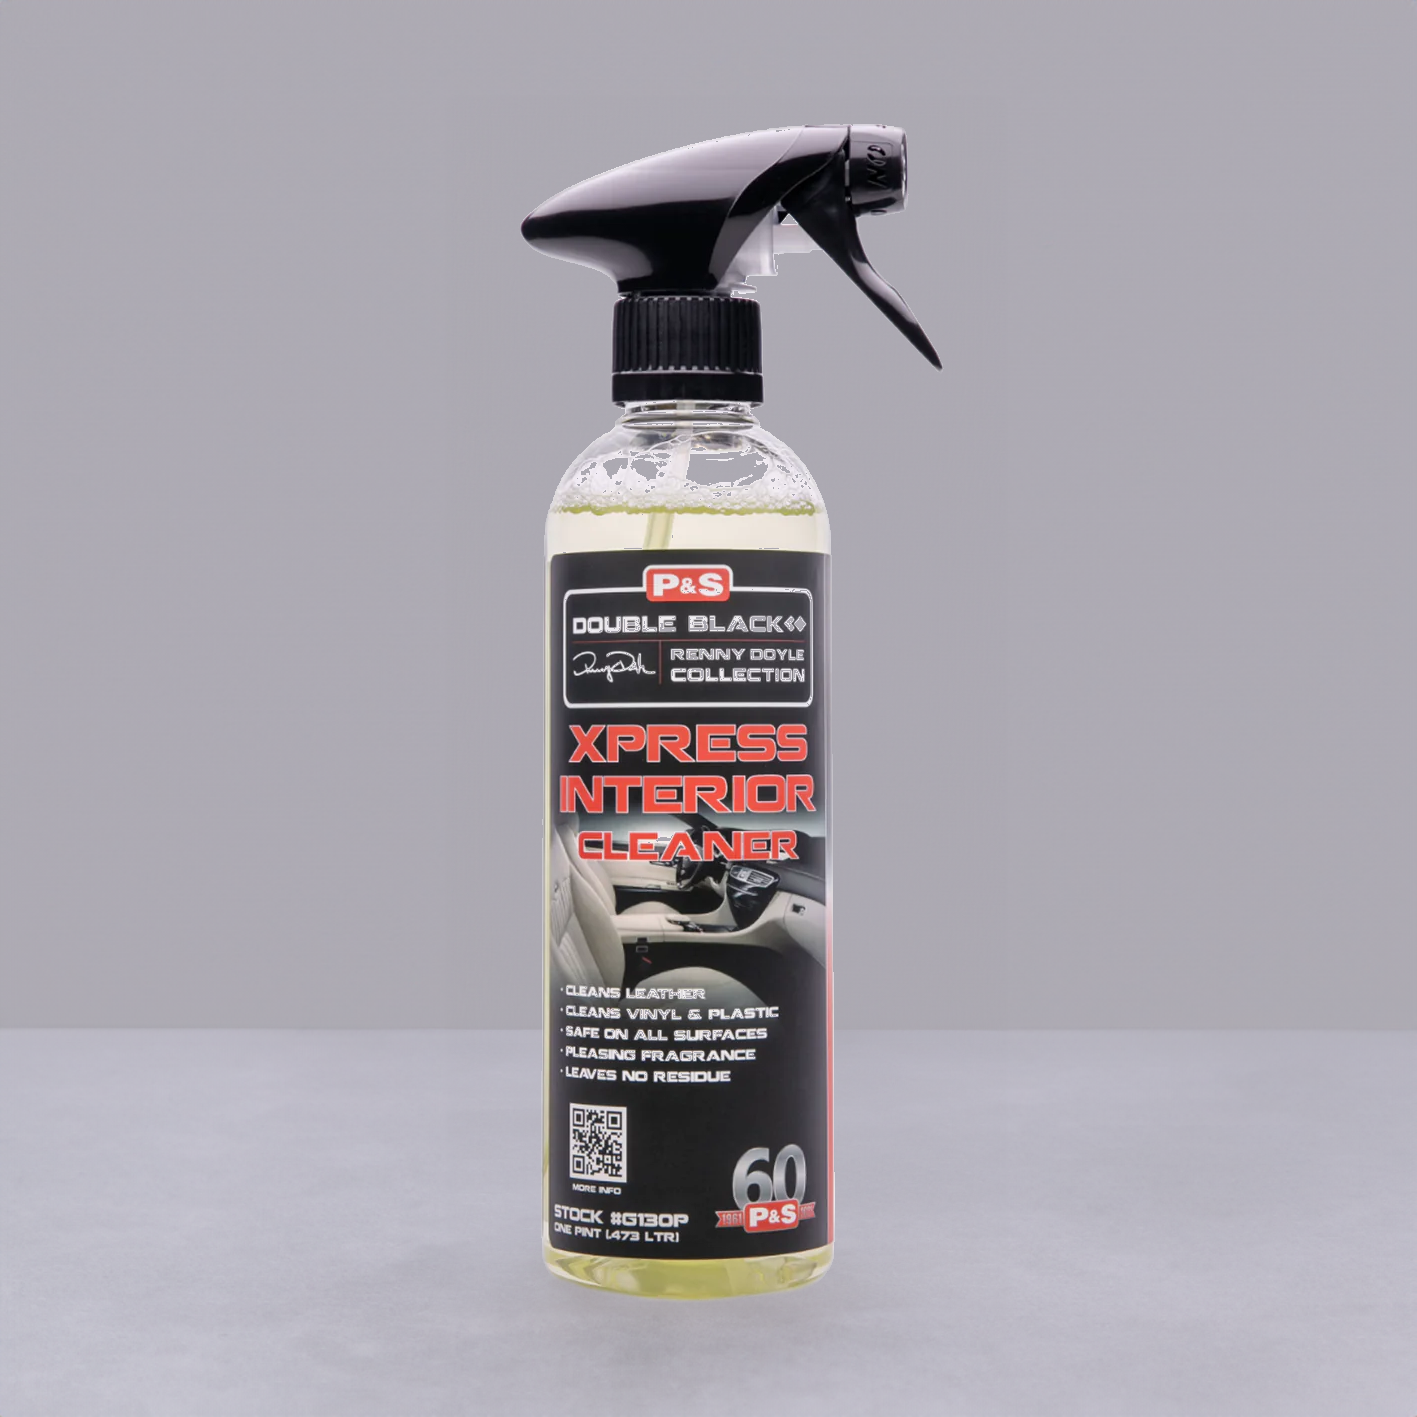  P&S Professional Detail Products - Xpress Interior Cleaner -  Perfect for Cleaning All Vehicle Interior Surfaces of Traffic Marks, Dirt,  Grease, and Oil; Works on Leather, Vinyl, and Plastic (1 Quart) : Automotive